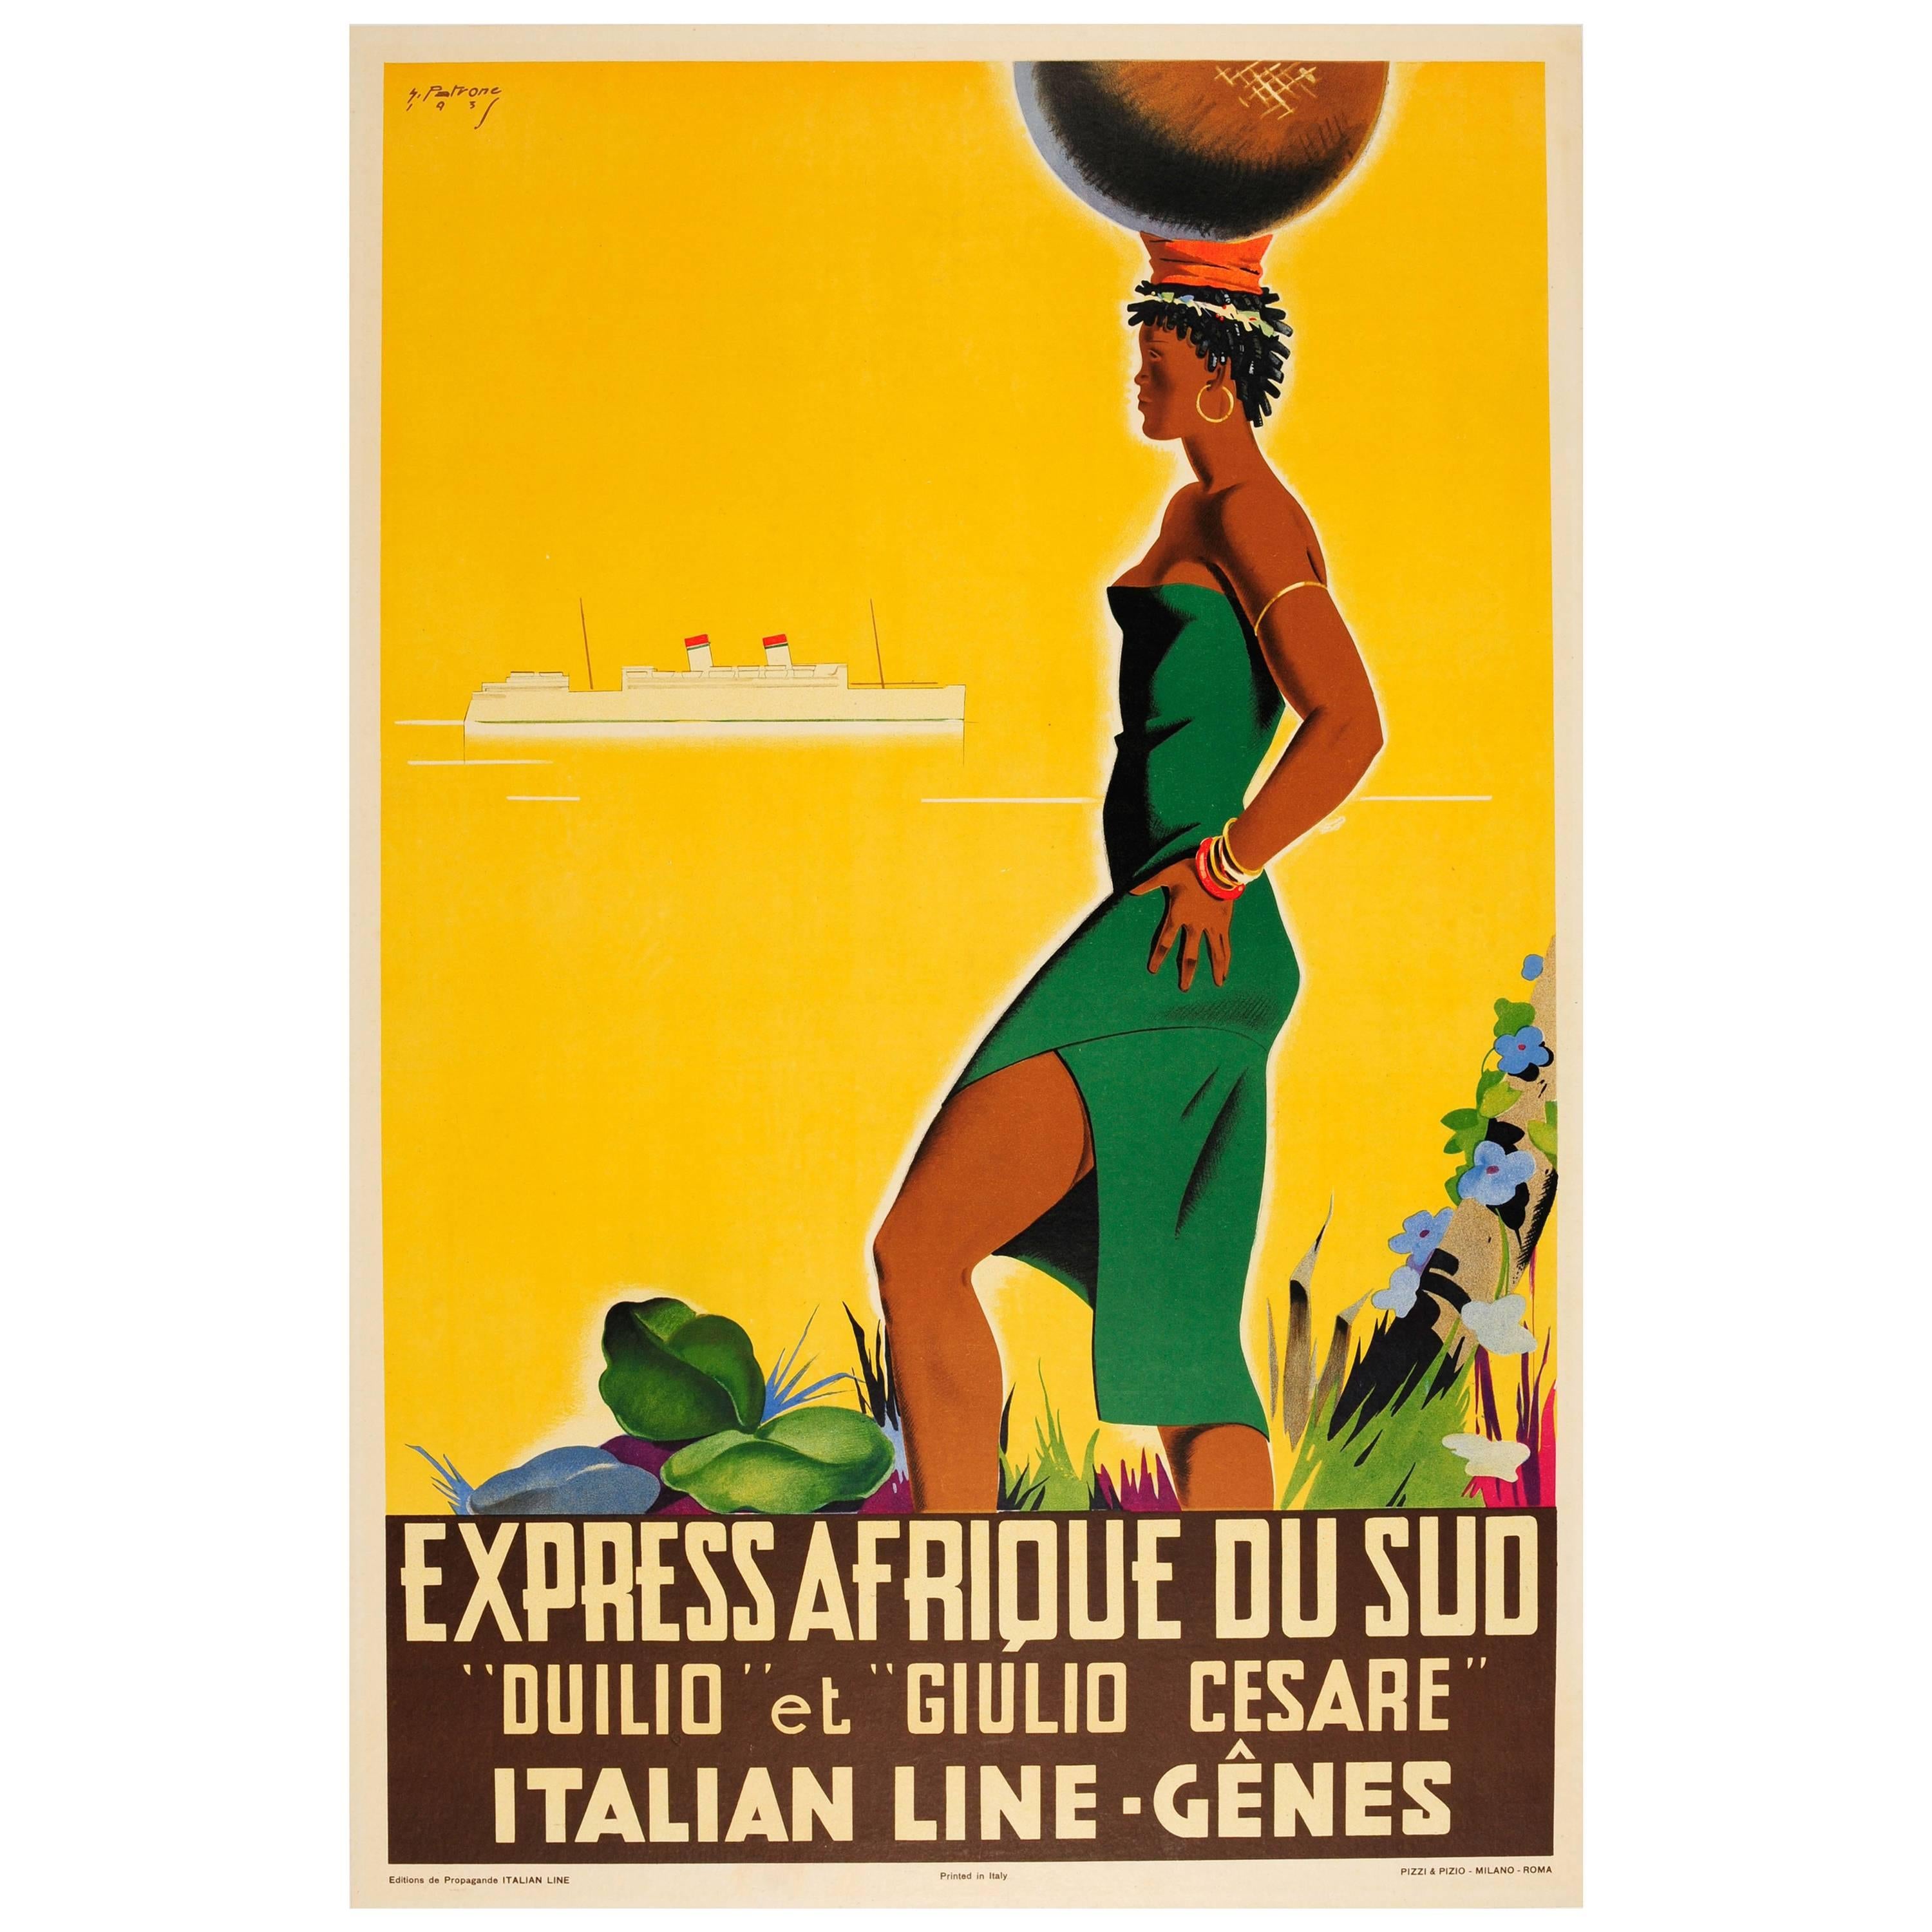 Original Italian Line Cruise Travel Poster for South Africa by Express Steamship